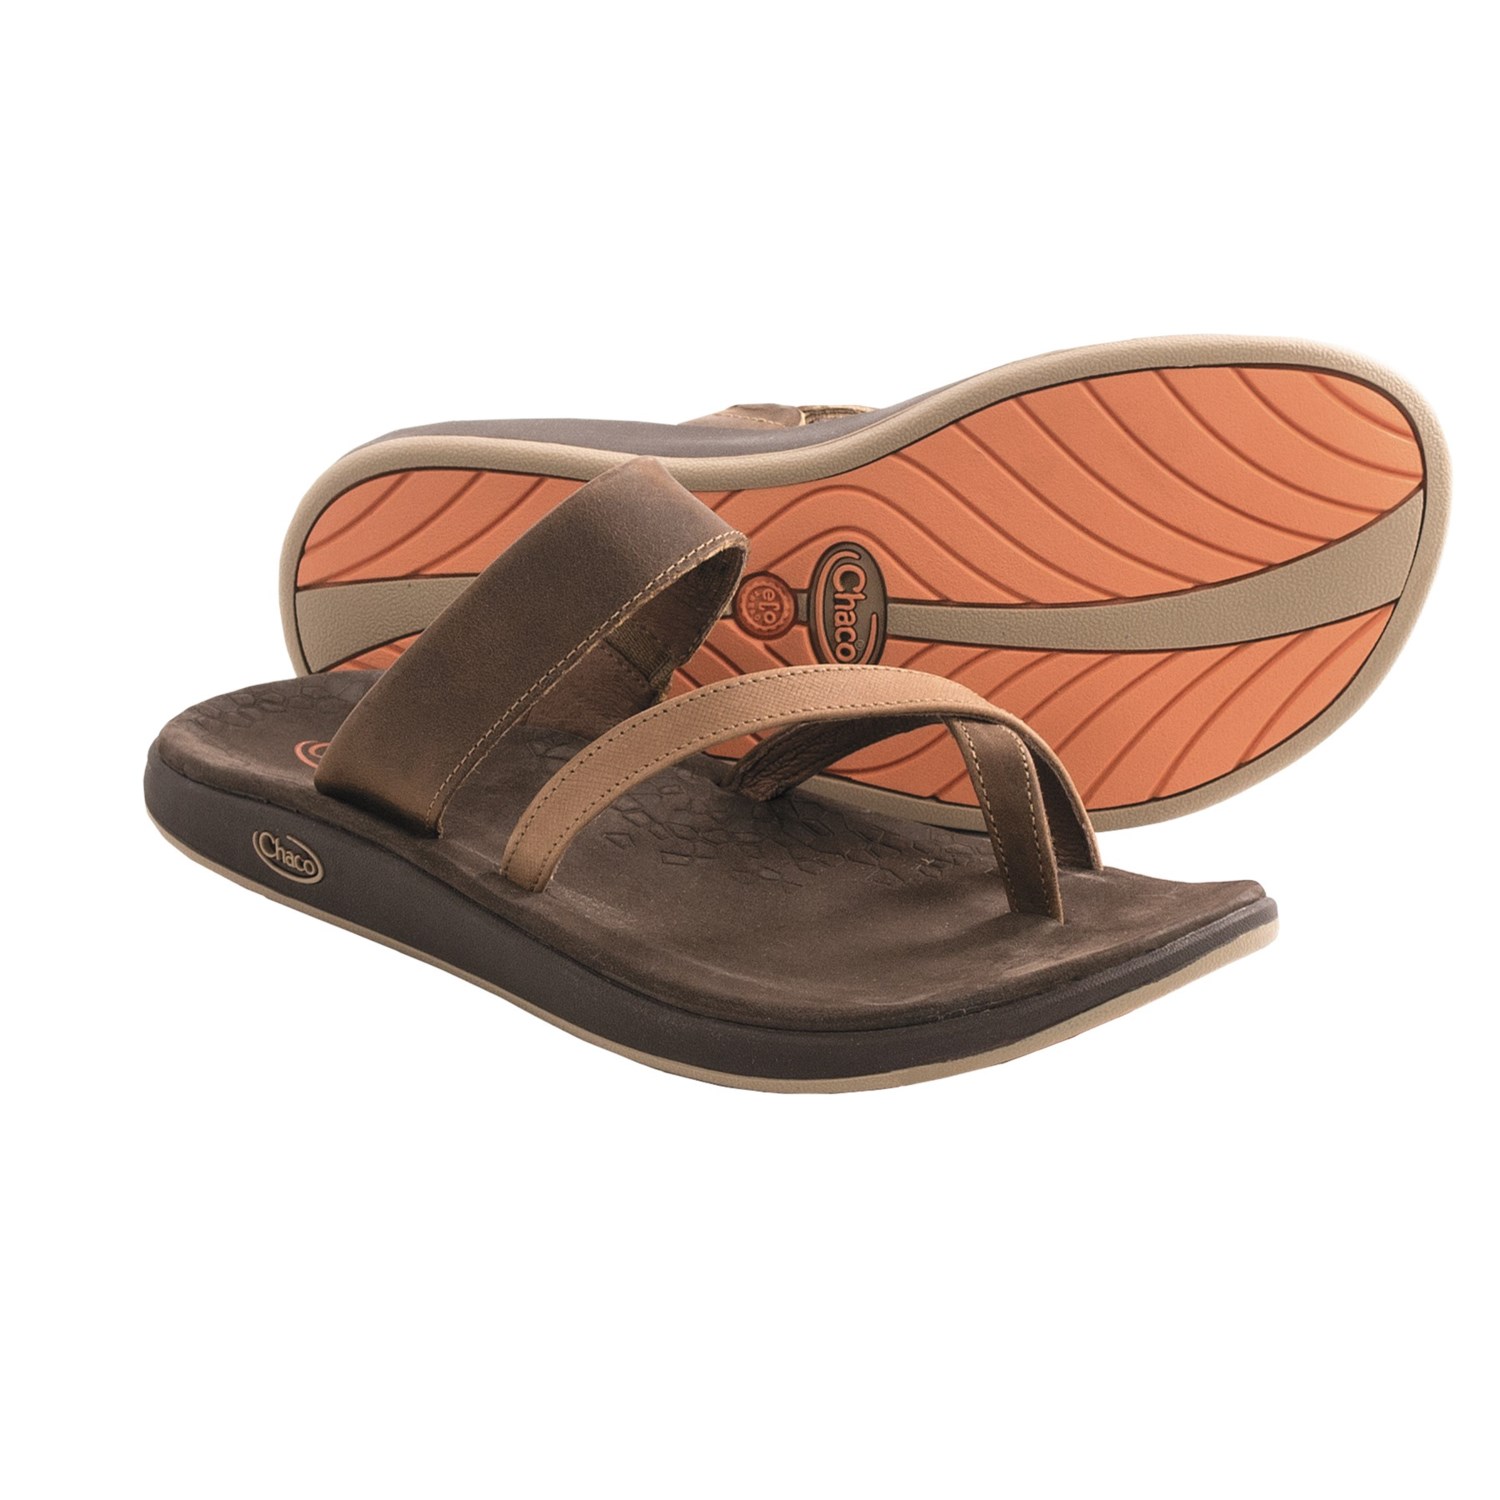 Chaco Stowe Sandals (For Women) - Save 20%